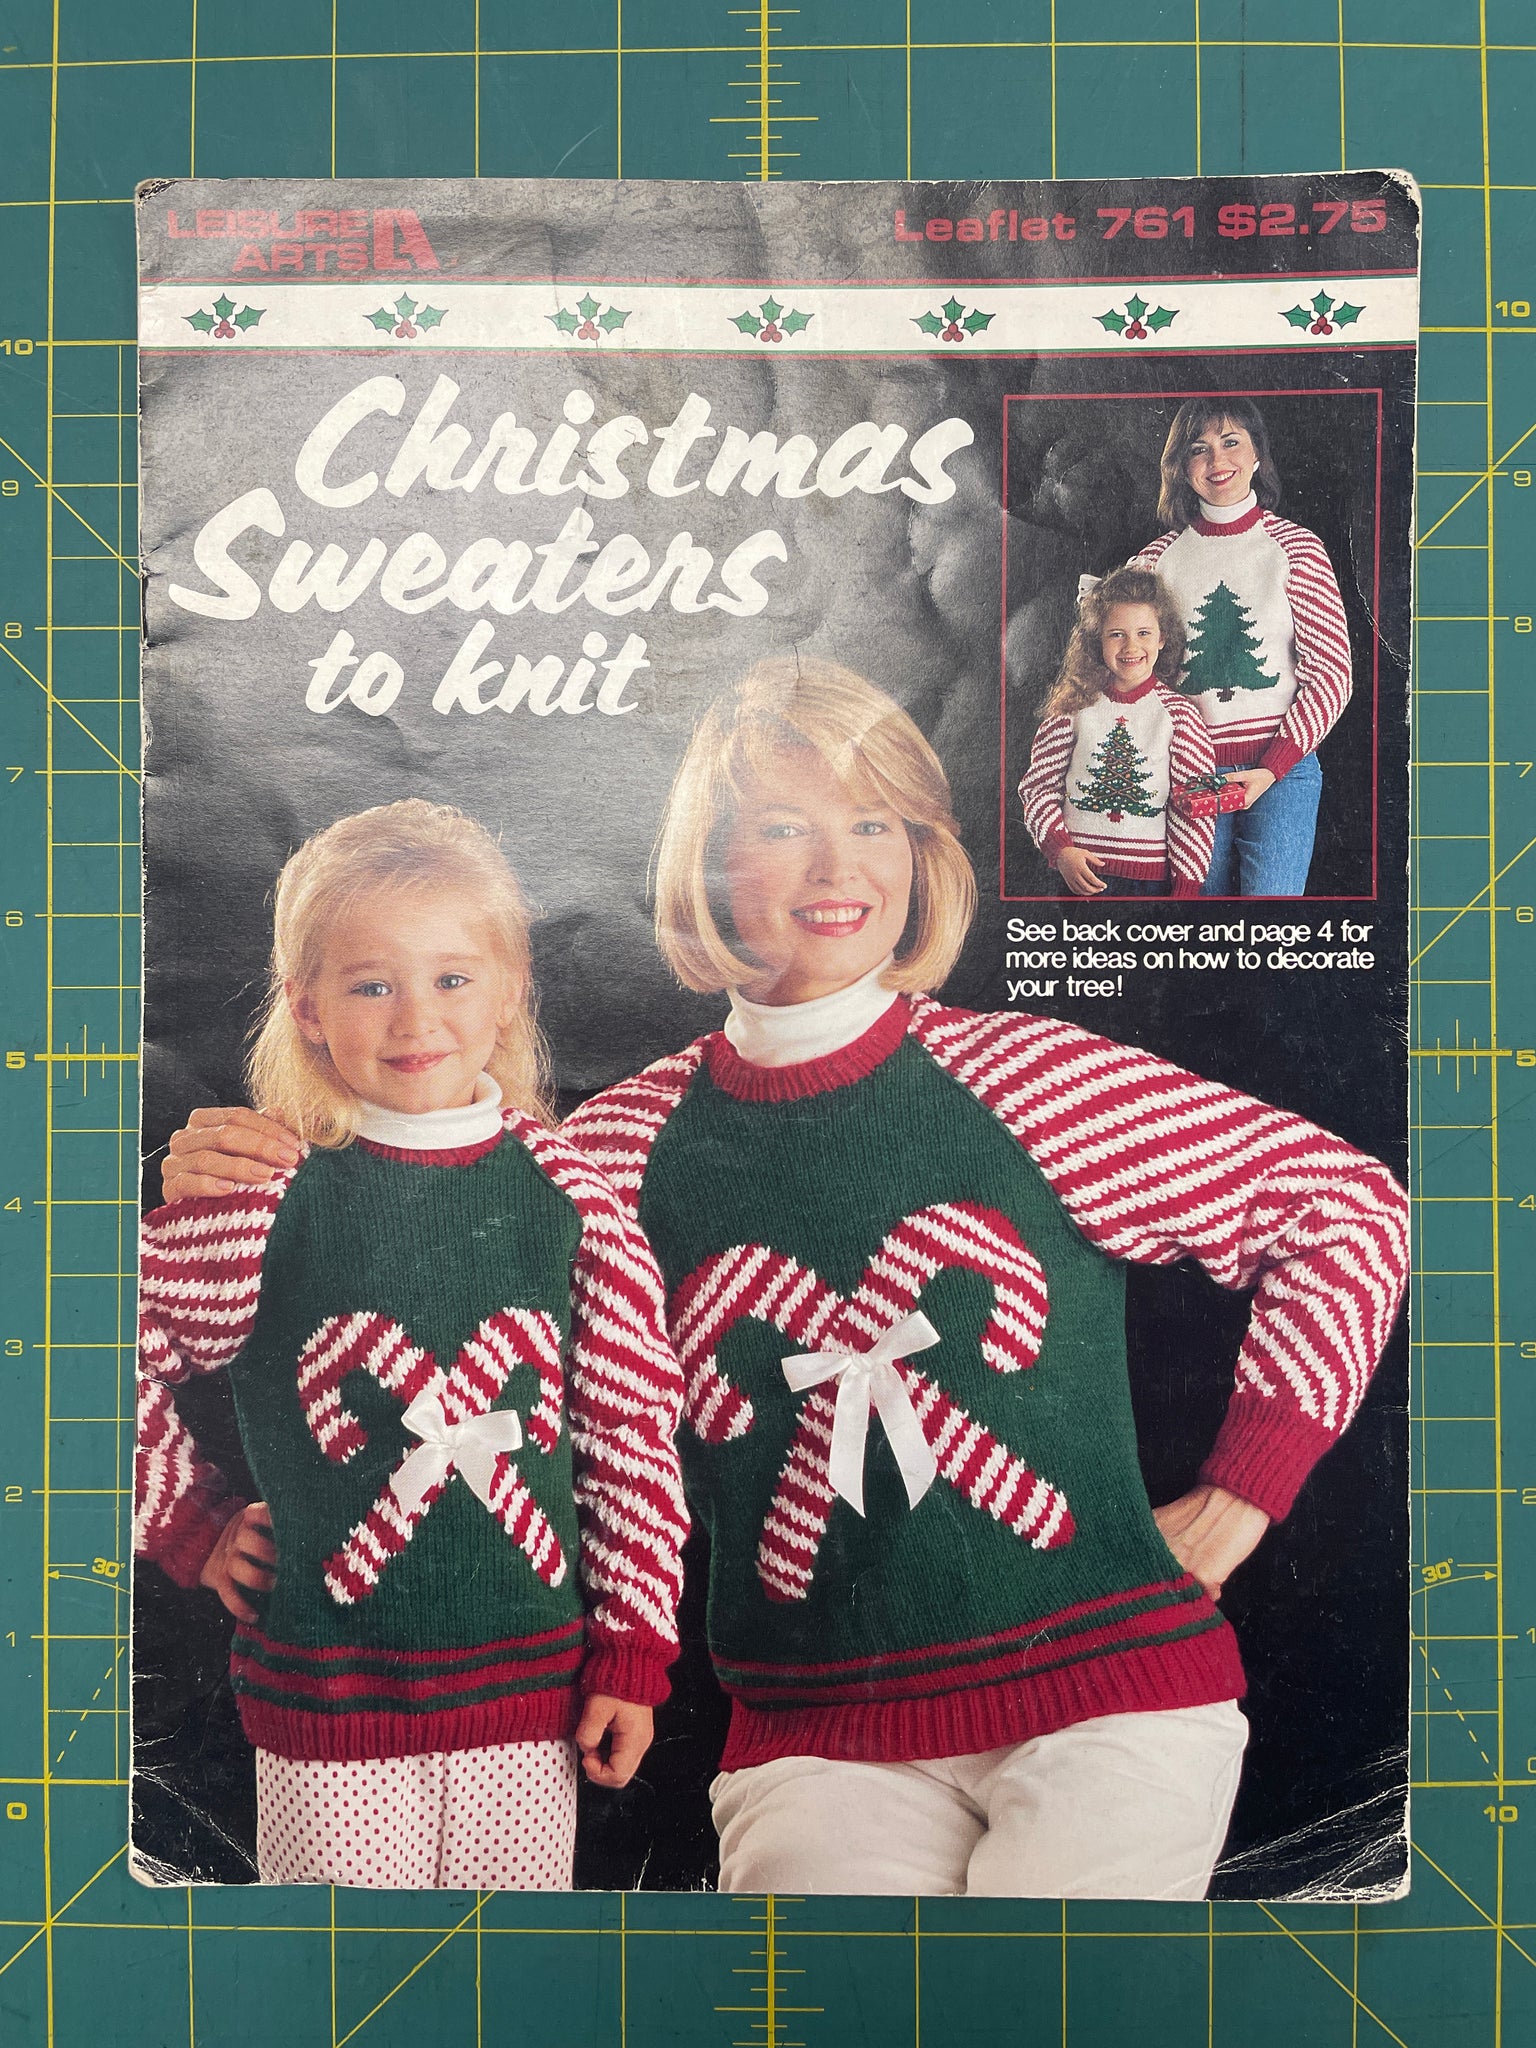 1989 "Christmas Sweaters to Knit" Leaflet